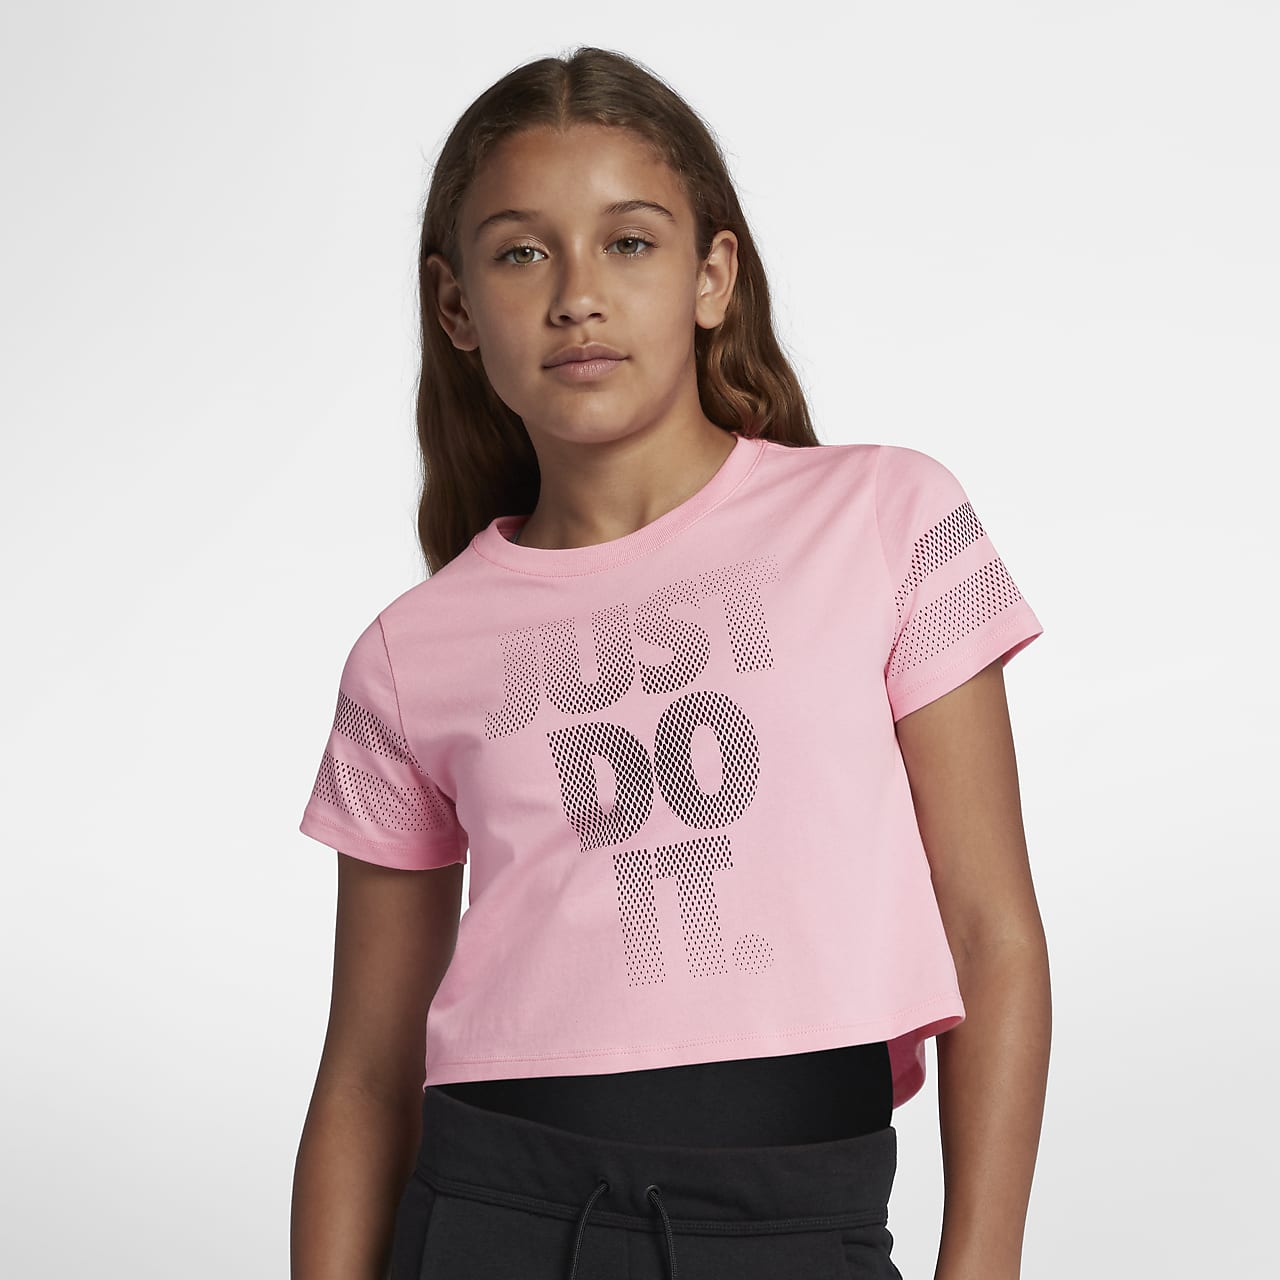 nike clothing for kid